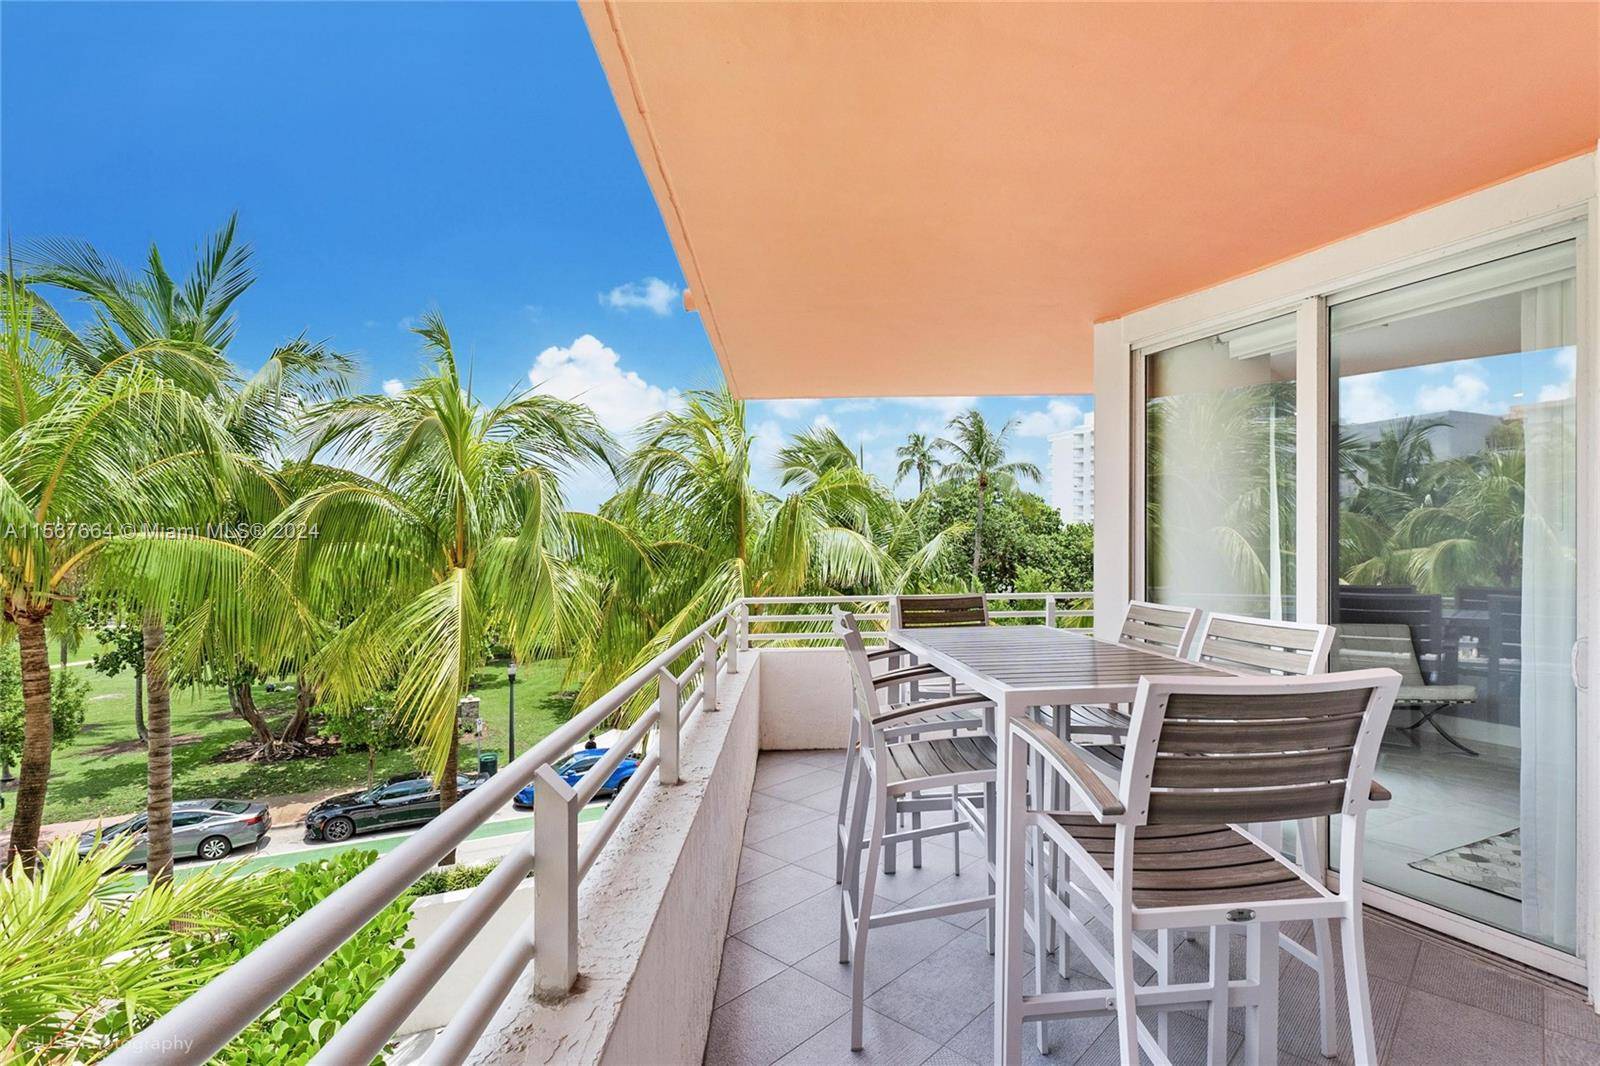 Ocean Front off seasonal rental located in the highly desirable South of Fifth.